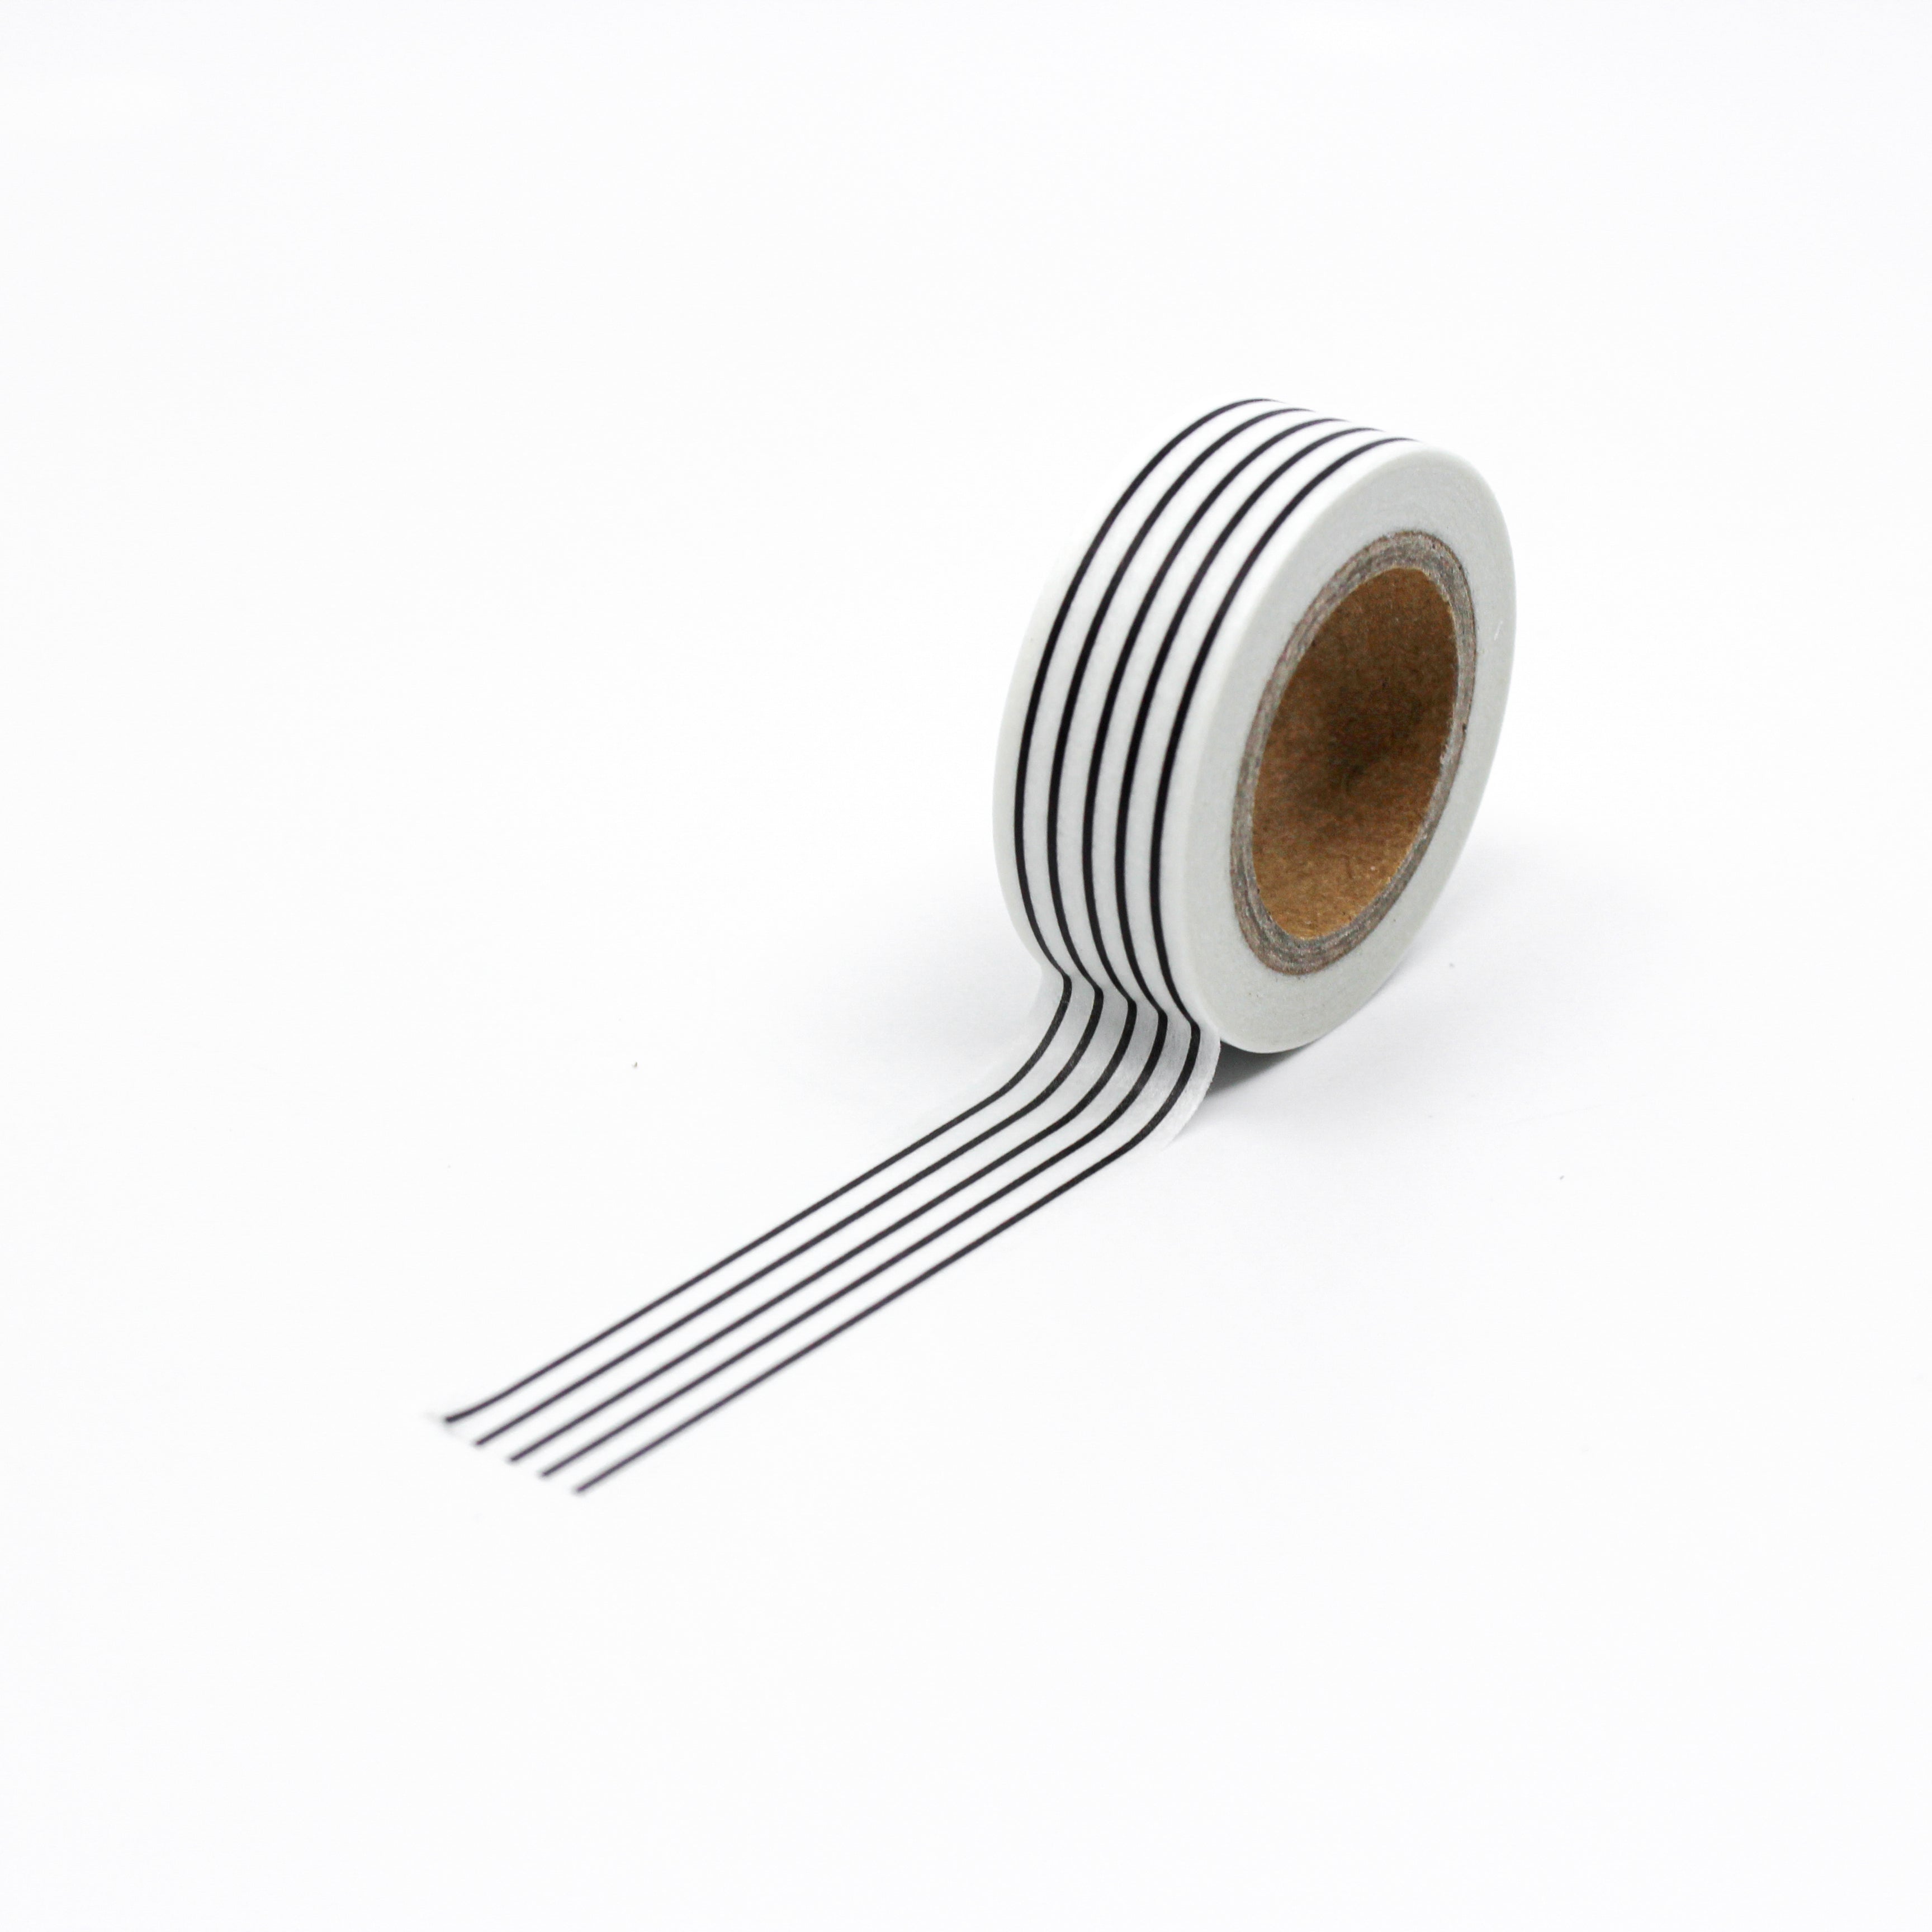 This is a repeat full view of thin black stripe pattern washi tape from BBB Supplies Craft Shop